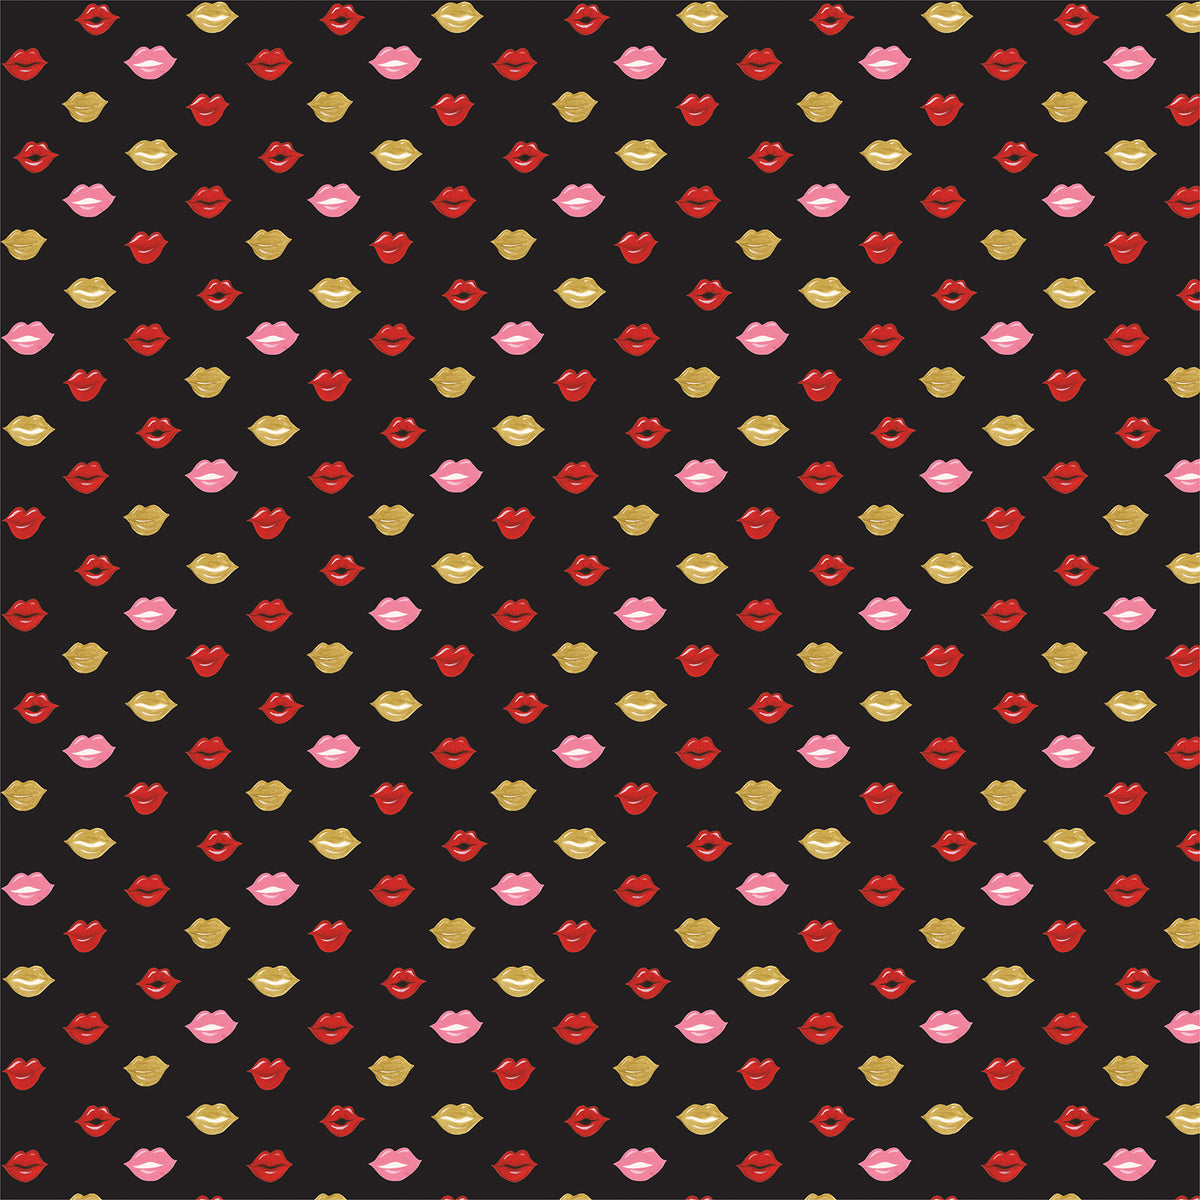 12x12 Valentines paper with rows of luscious lips on black background from Echo Park Paper